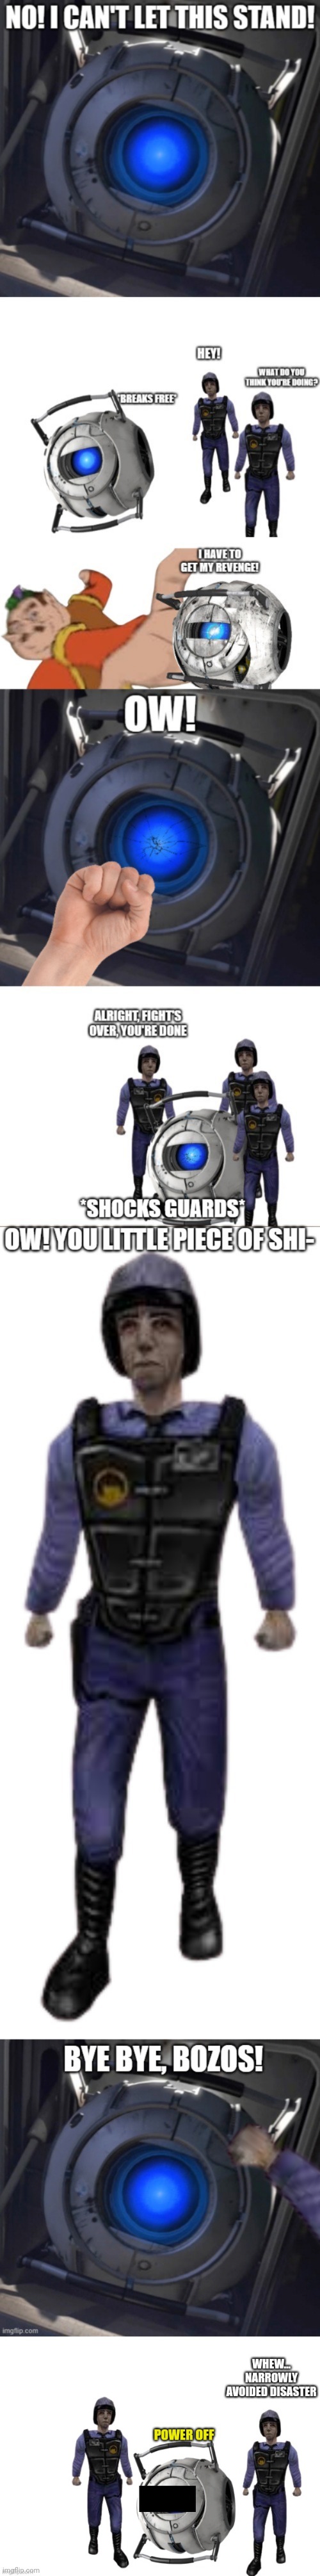 These guards are ruthless | made w/ Imgflip meme maker